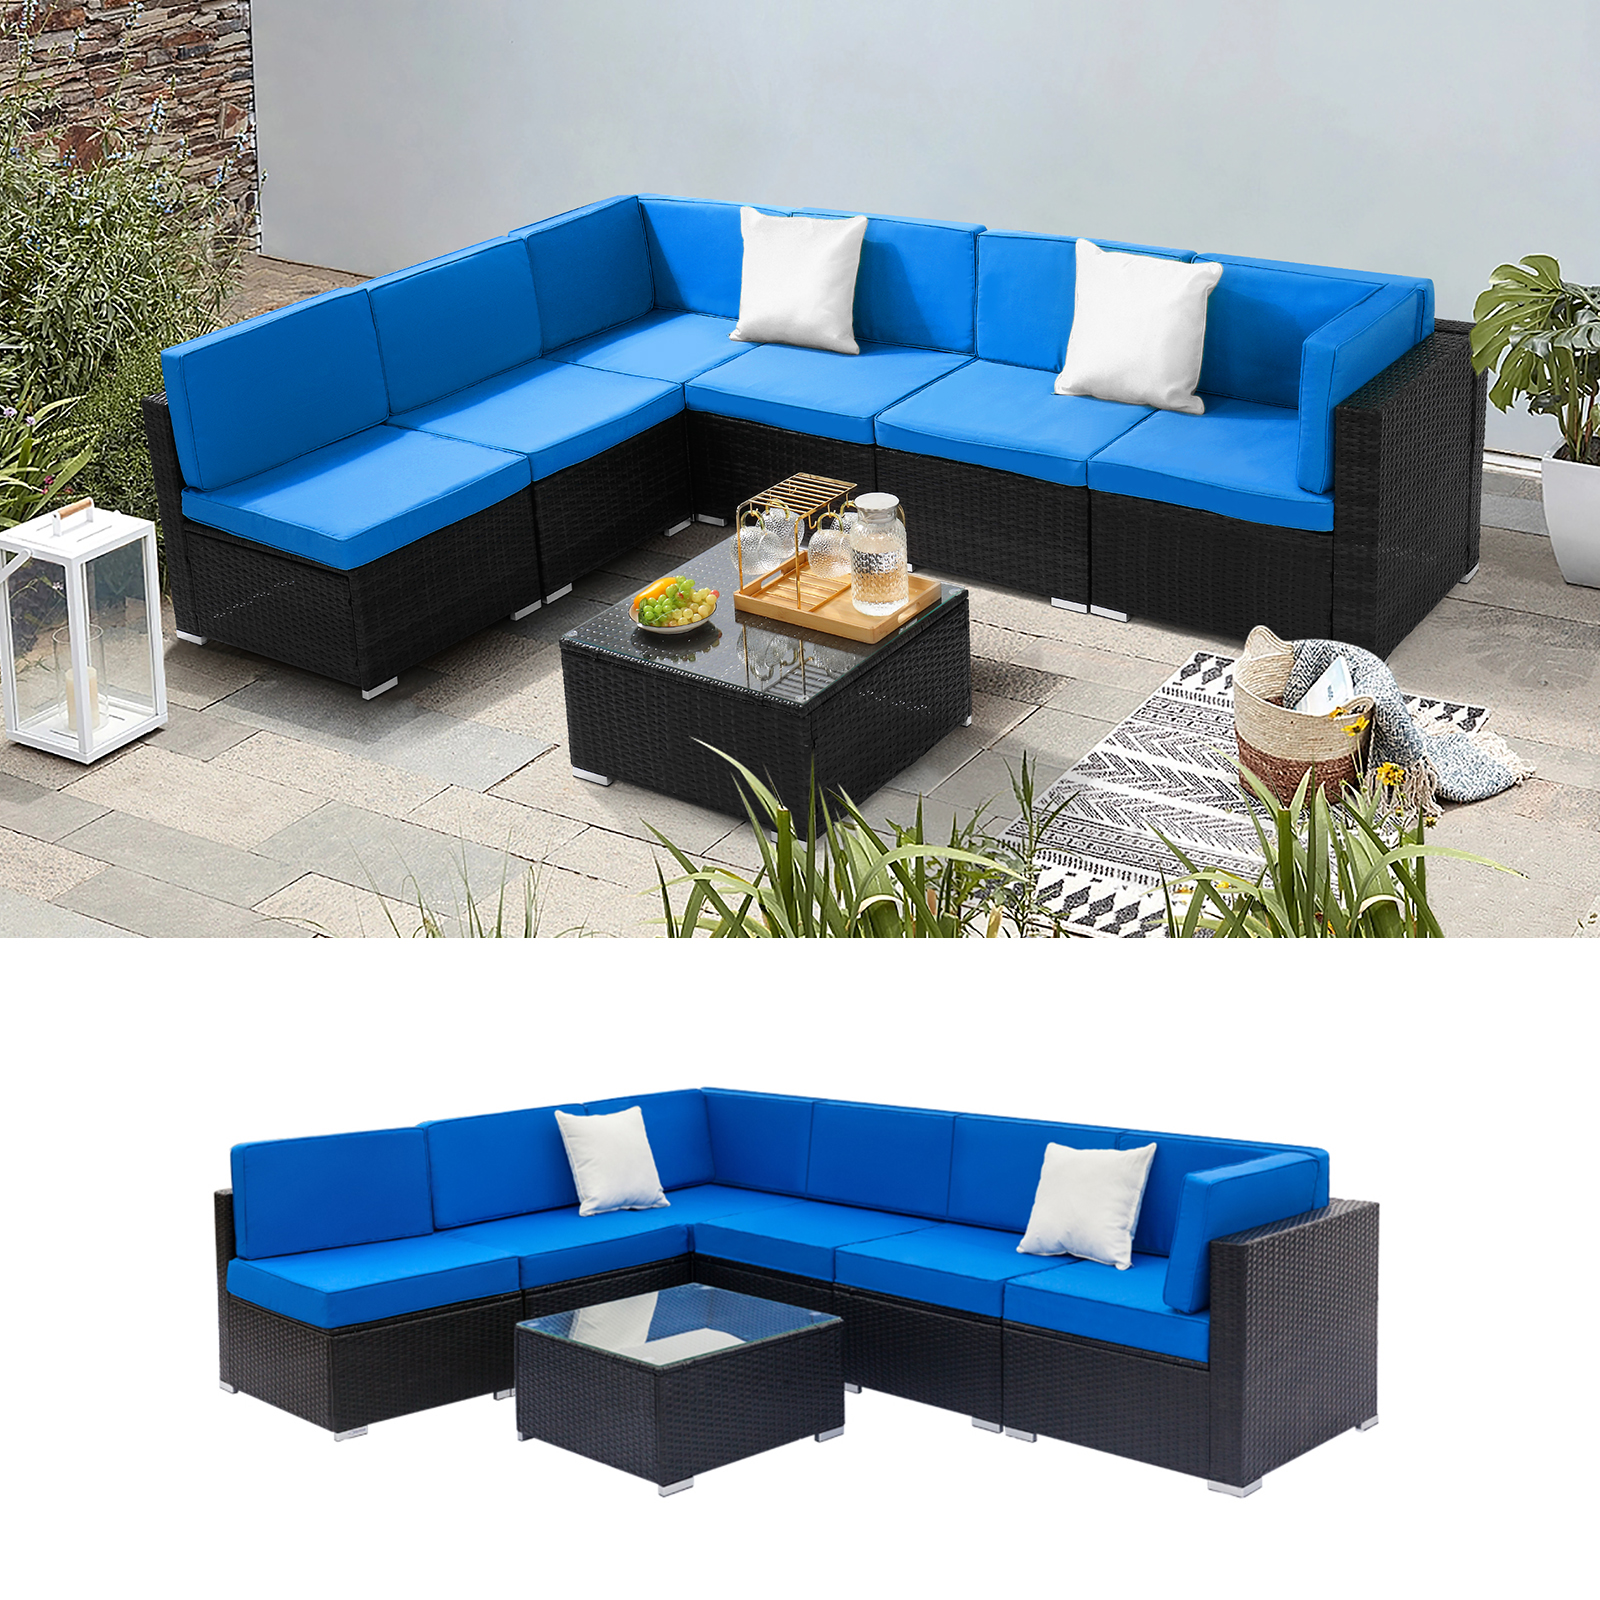 Zimtown 7PCS Outdoor Patio Sectional Set, Wicker Couch Sofa Set, Rattan Conversation Set, All Weather Chat Set for 6 Person, Blue and Black PE Rattan with Table - image 5 of 9